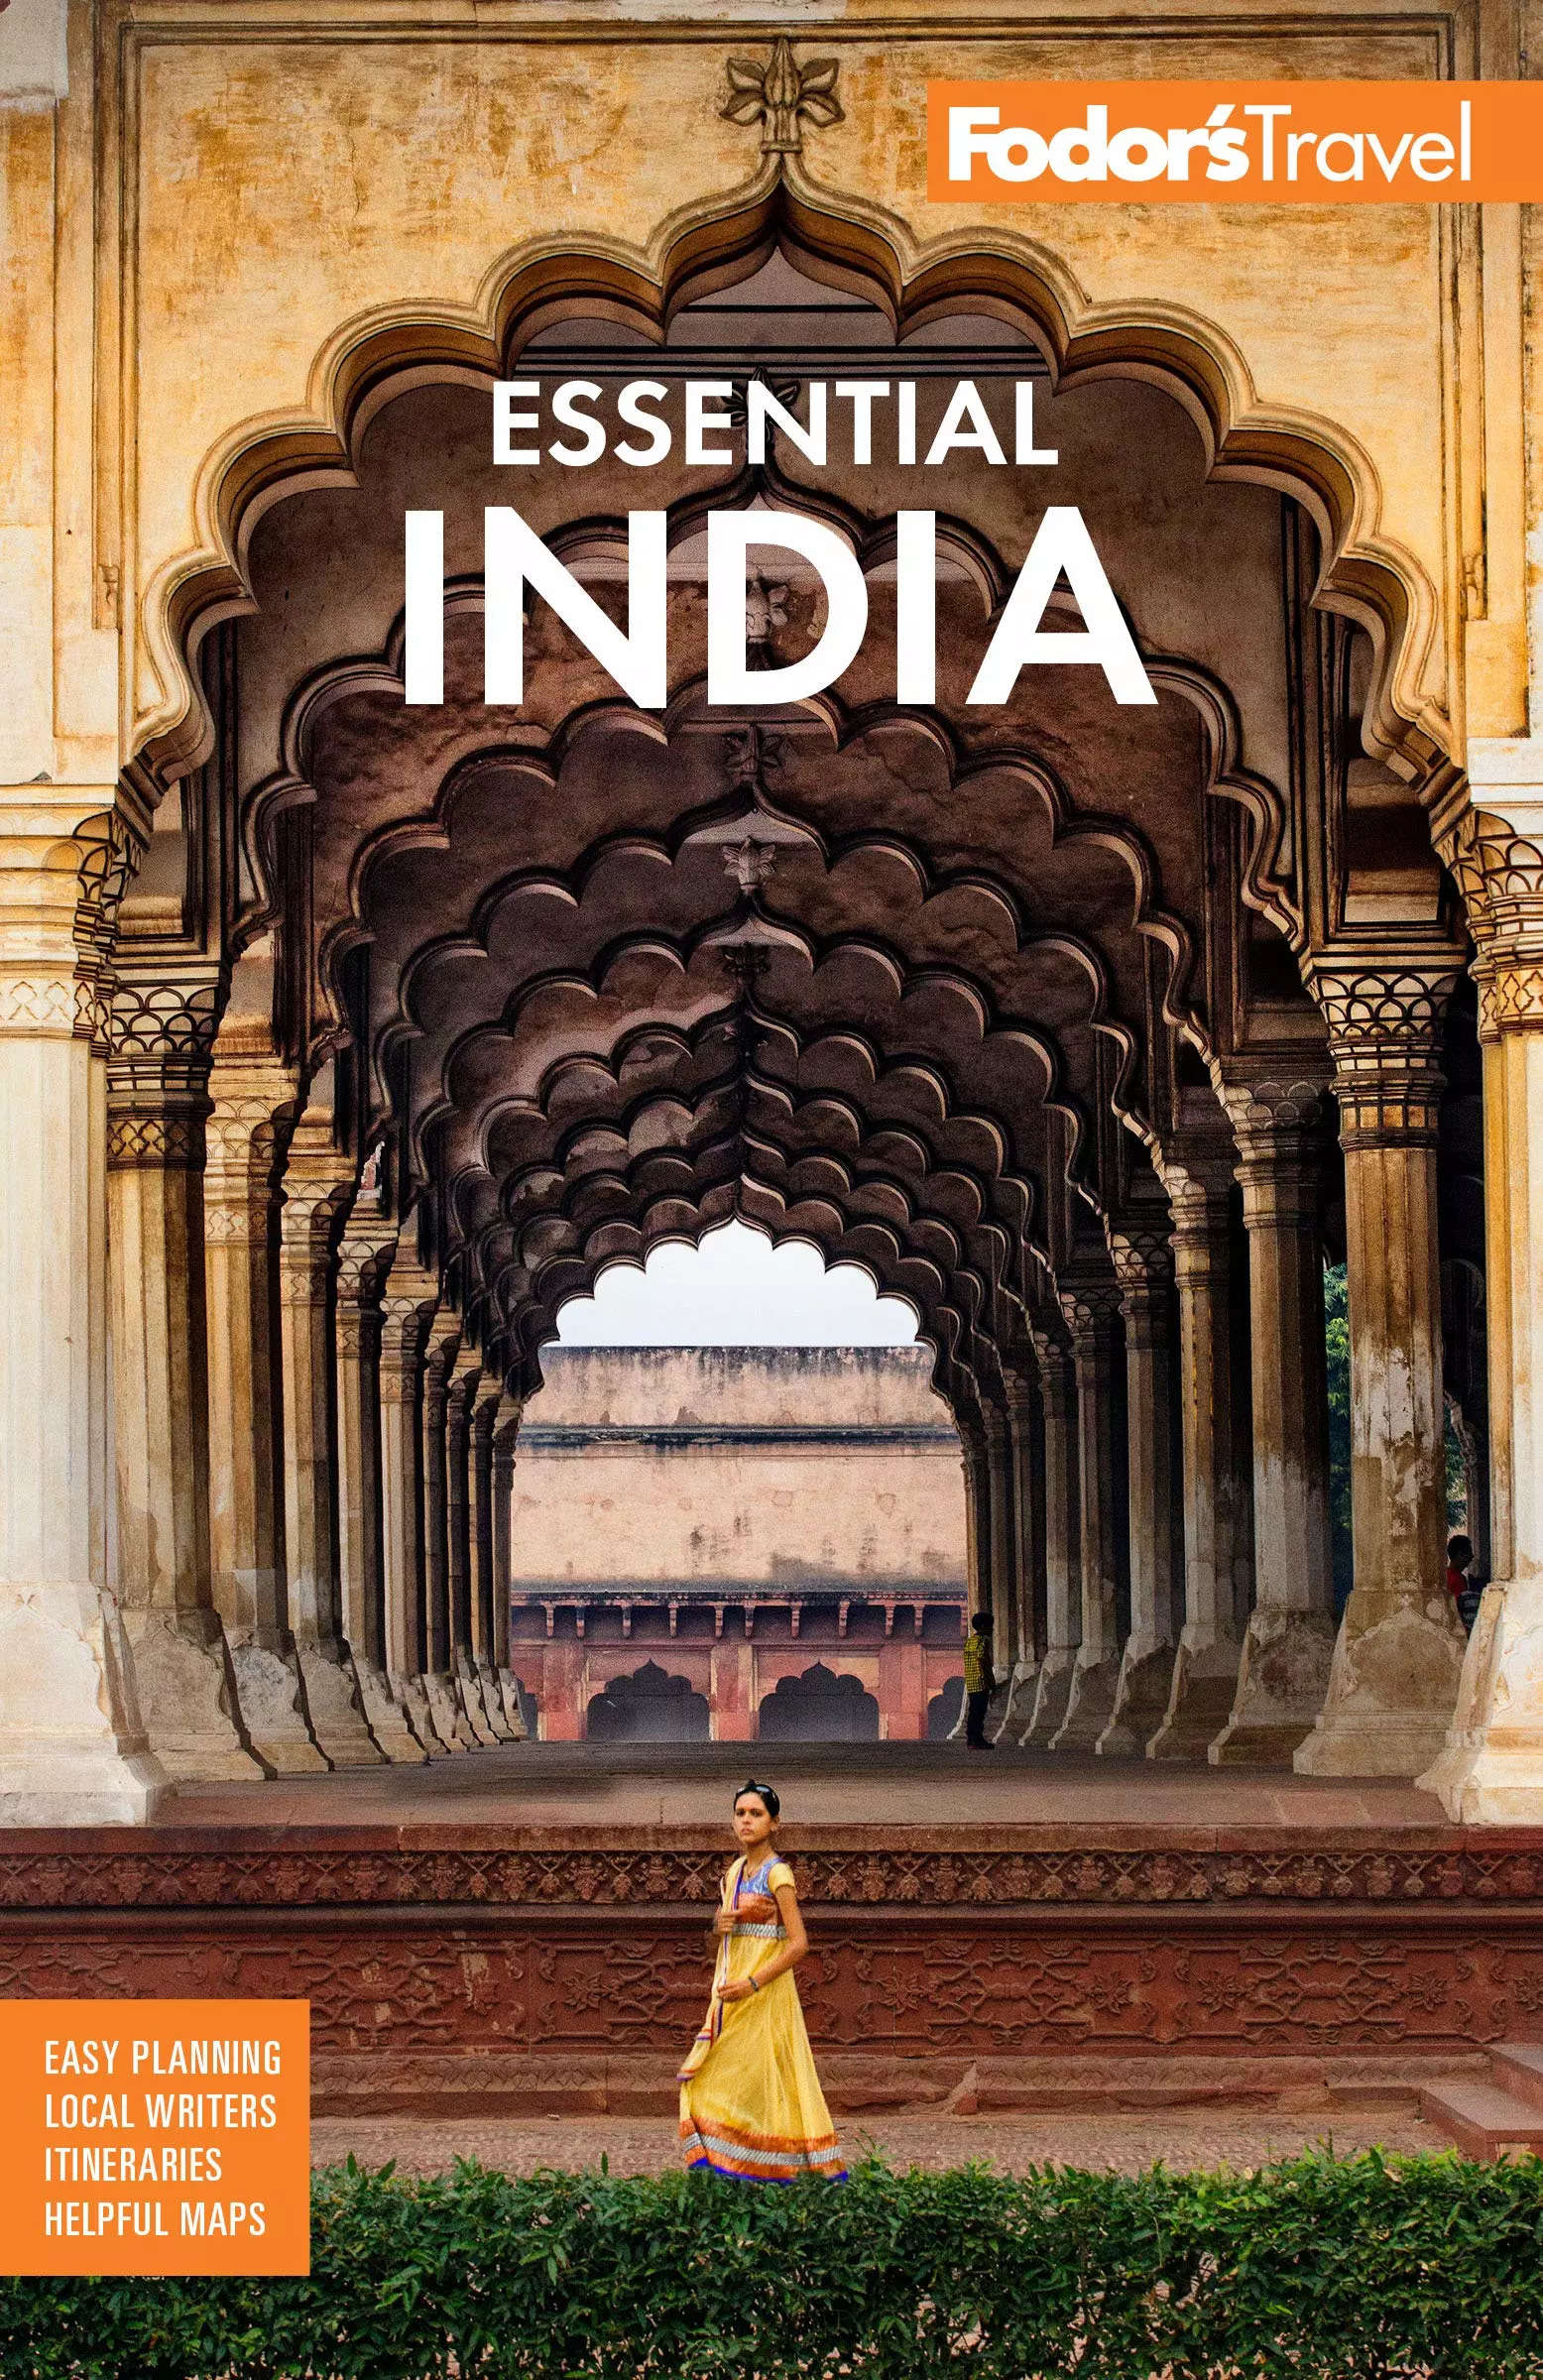 India The Journey - A Travel Book On India